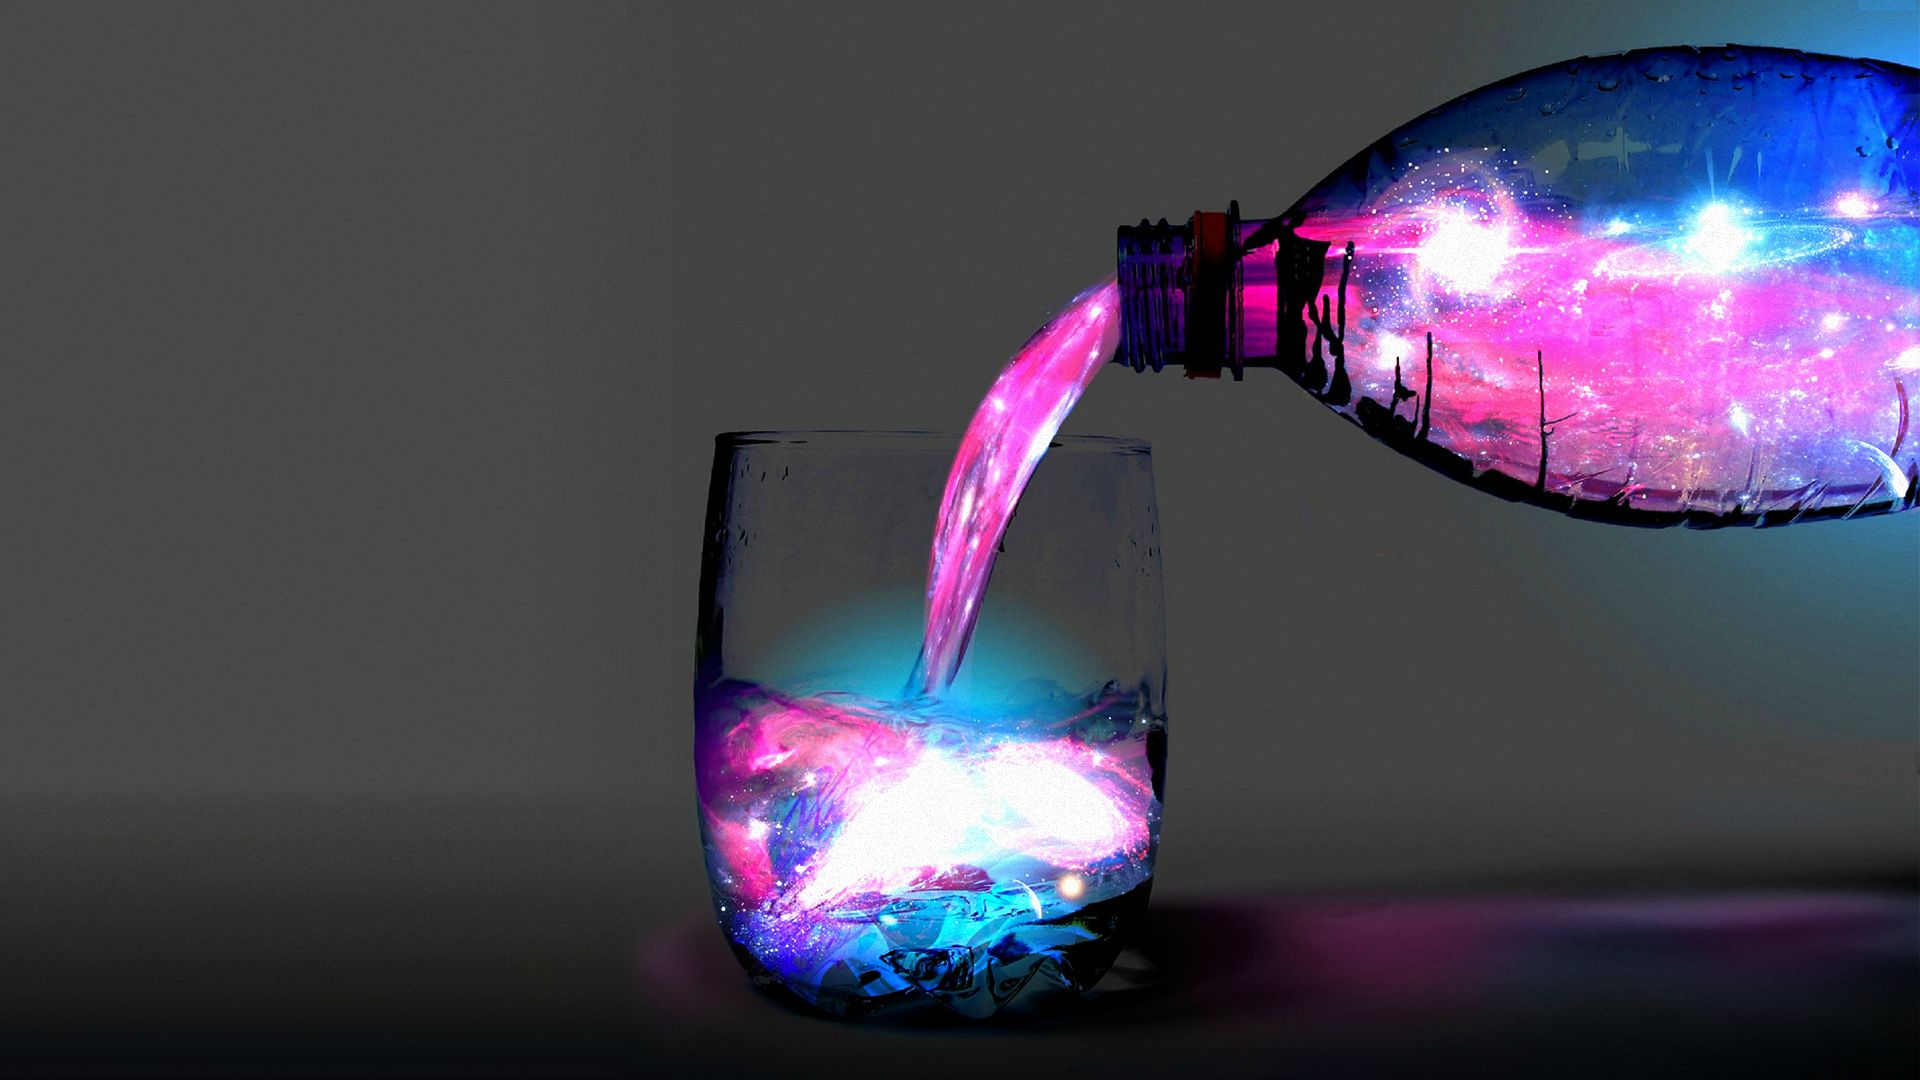 Amazing Fluorescent Pictures & Backgrounds